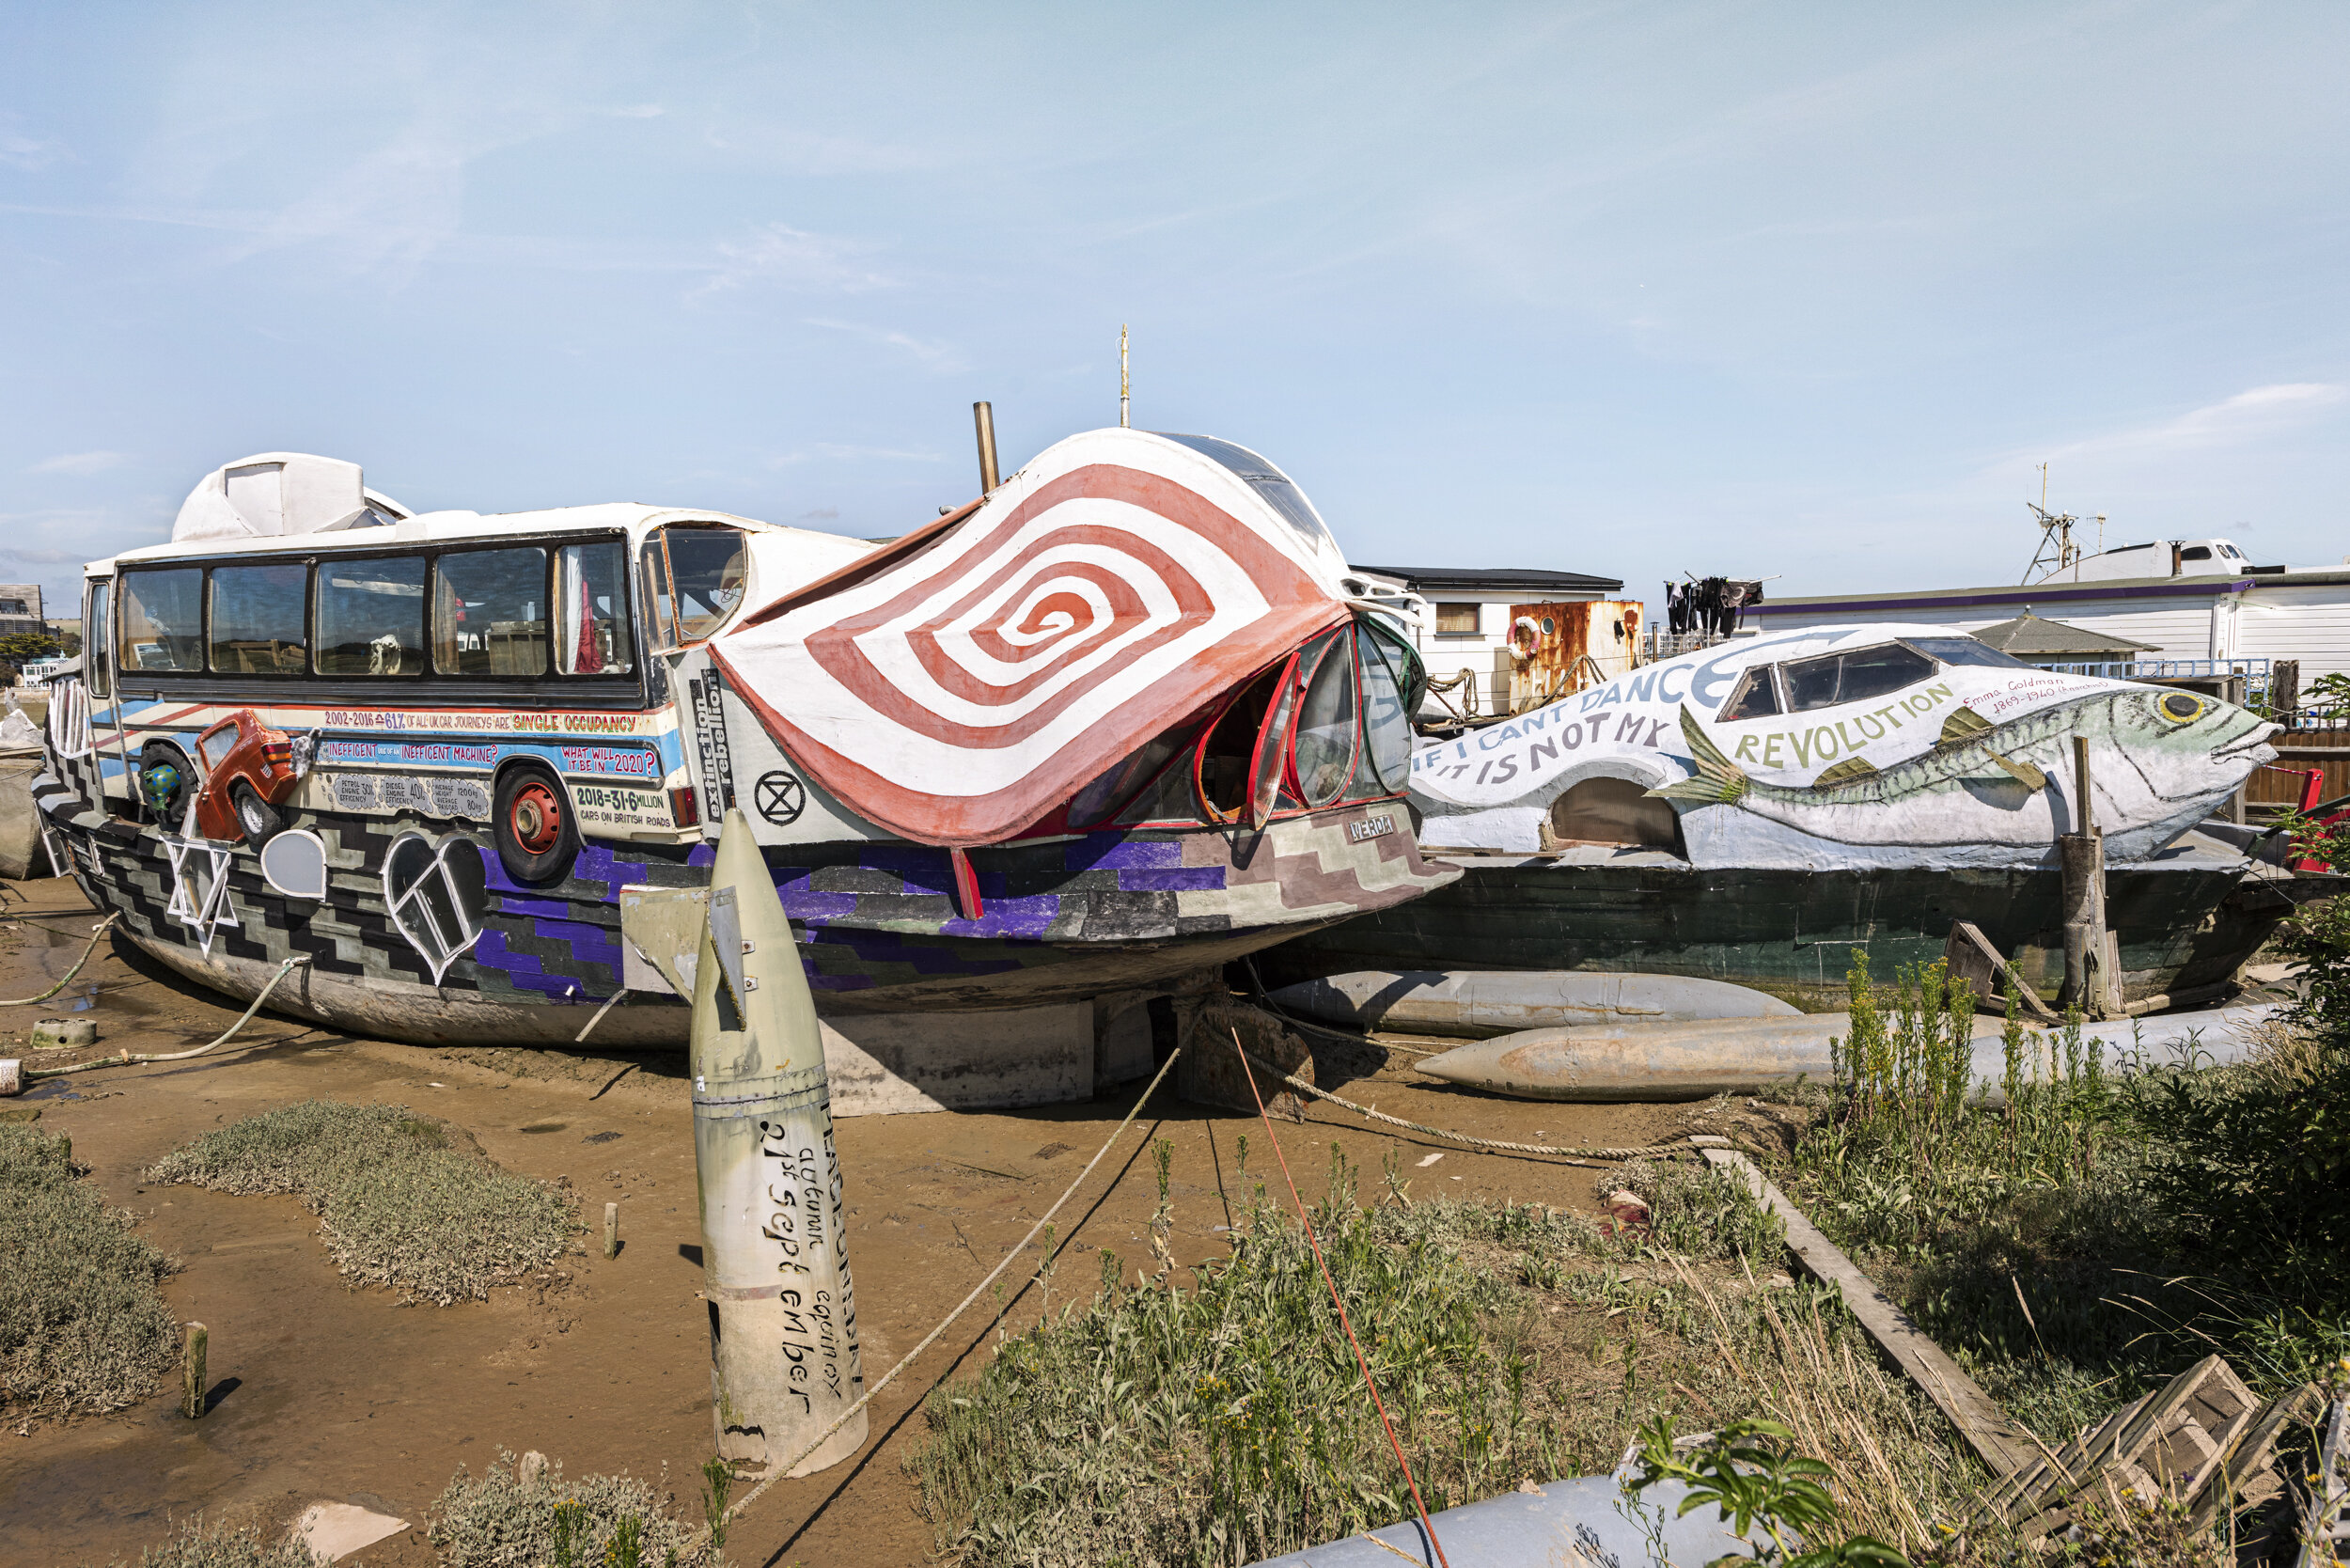 2 Shoreham Boatyard - Shoreham by Sea - East Sussex - Hamish McKenzie - The Keepers Project - David Clegg -Thierry Bal.jpg